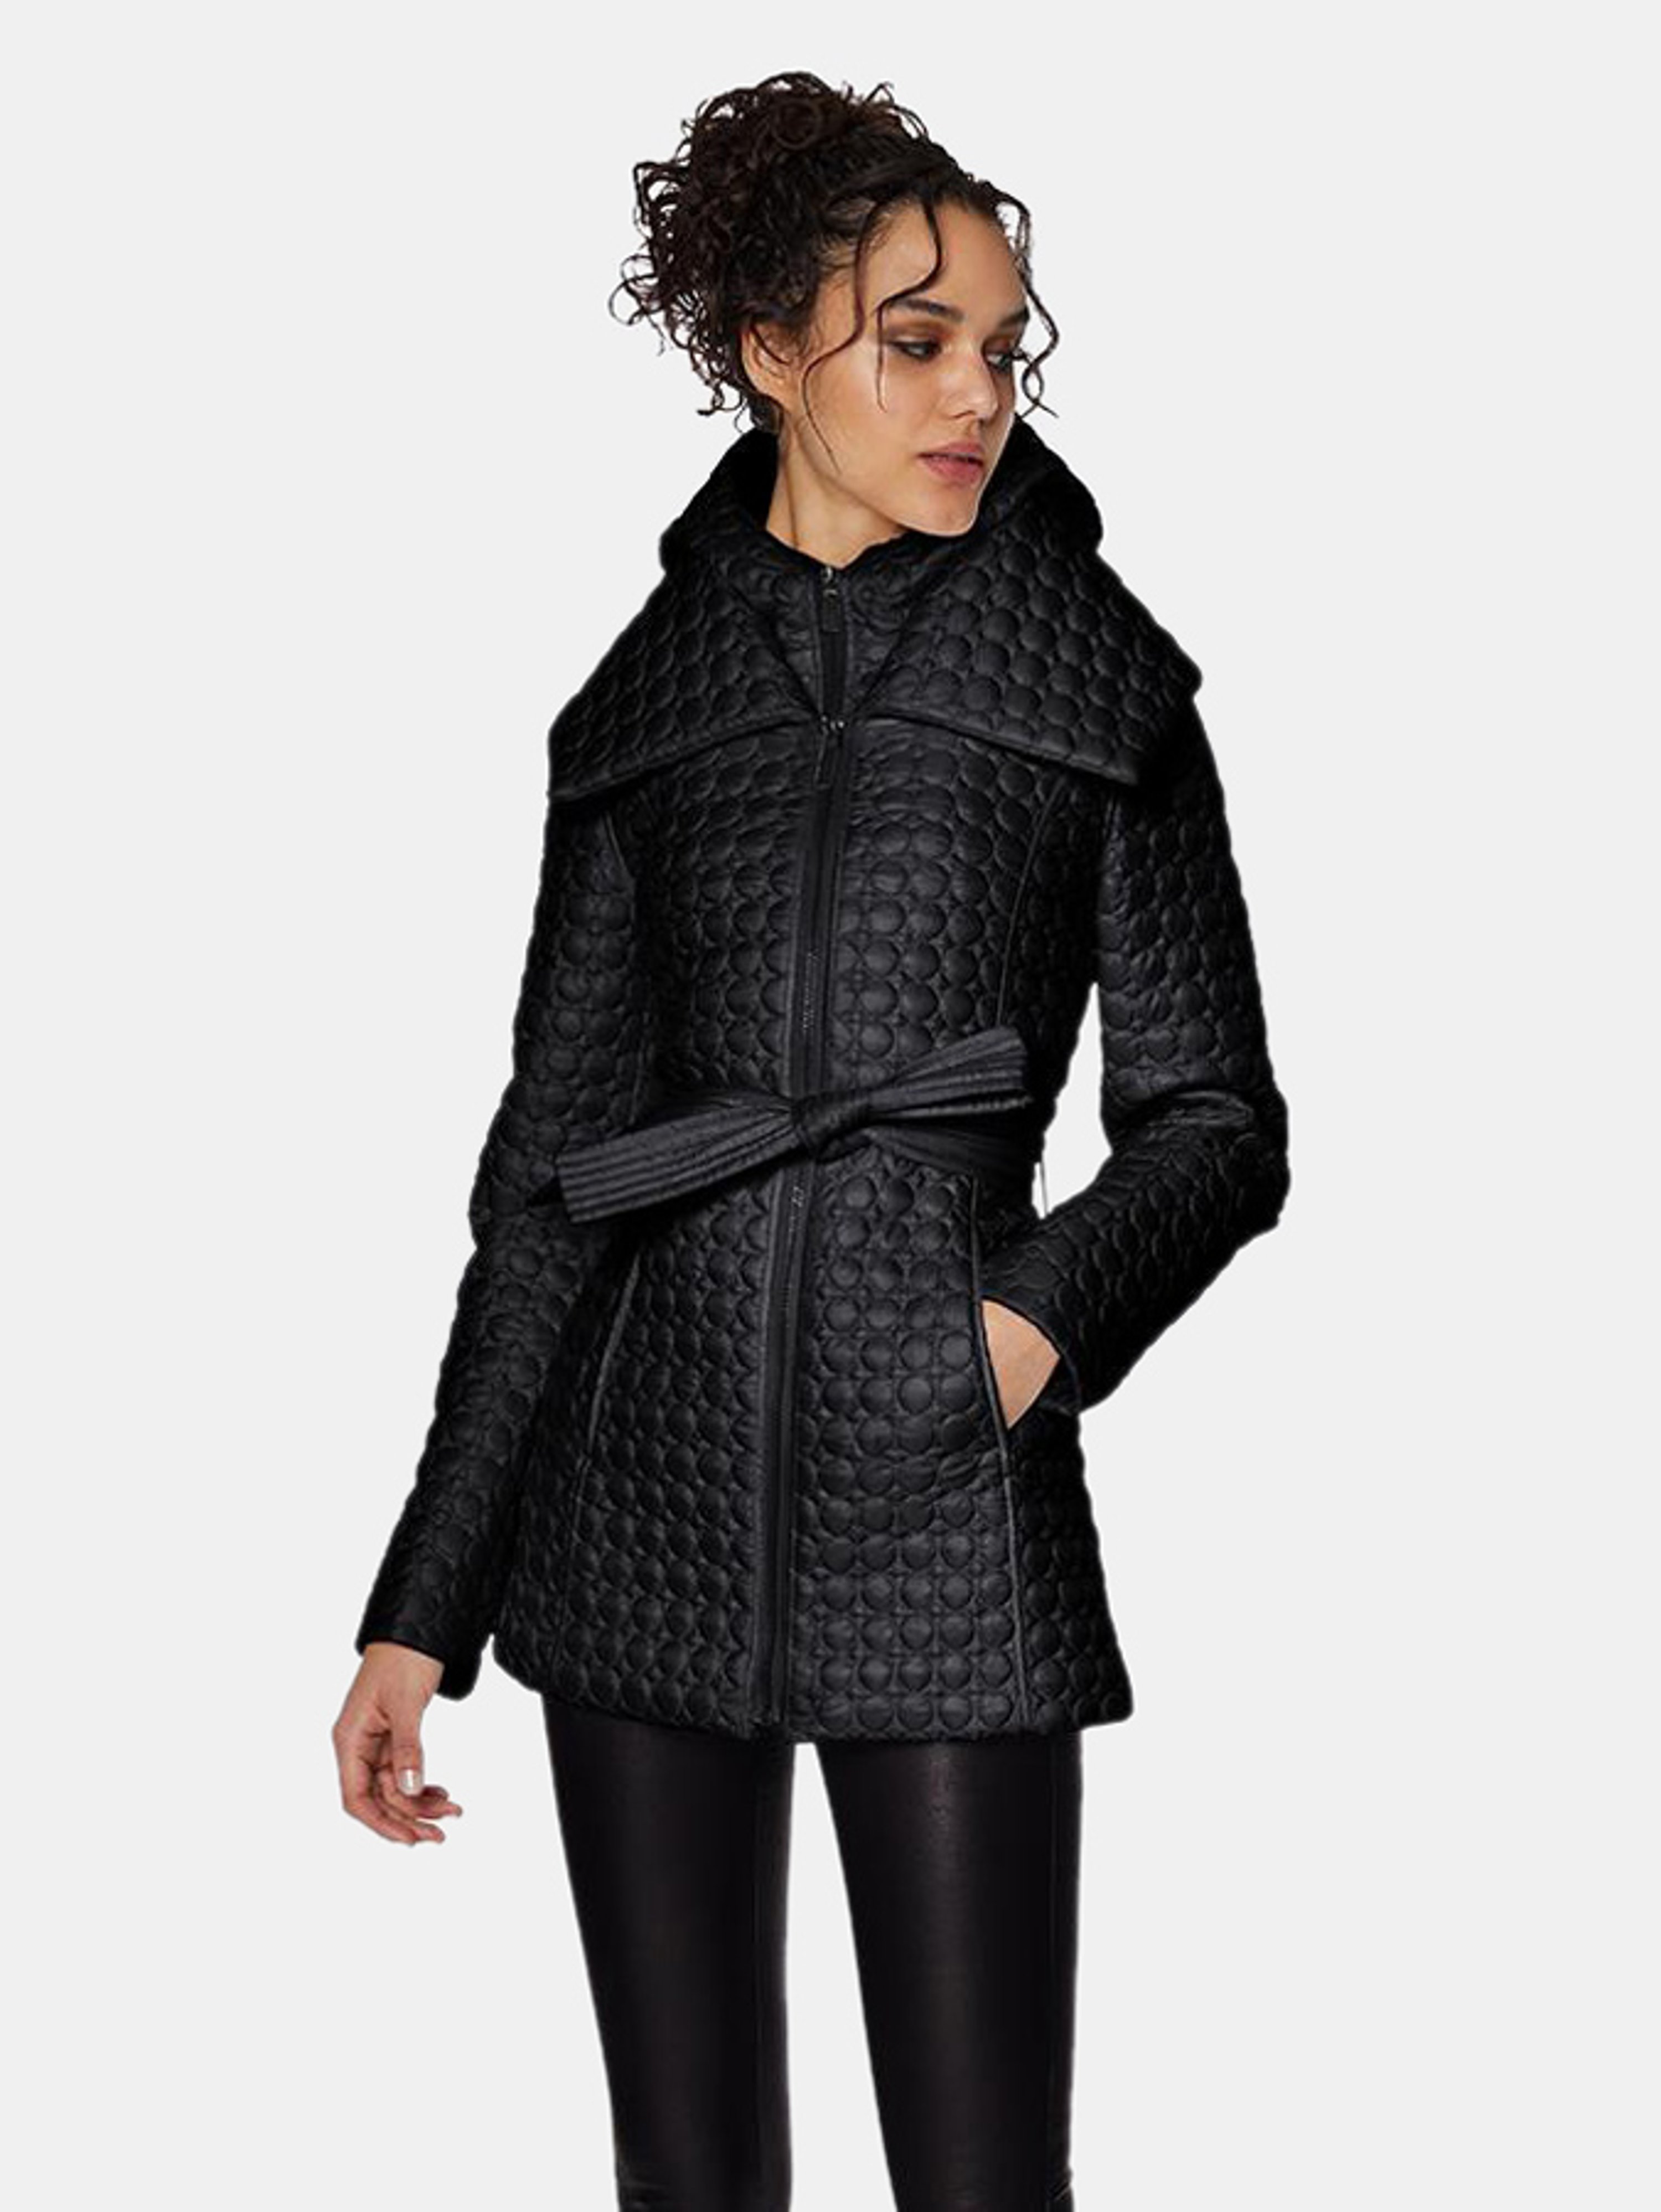 DAWN LEVY DAWN LEVY MORGAN MODERN JEWEL CIRCLE-QUILTED COAT WITH SET-IN HOODED BIB